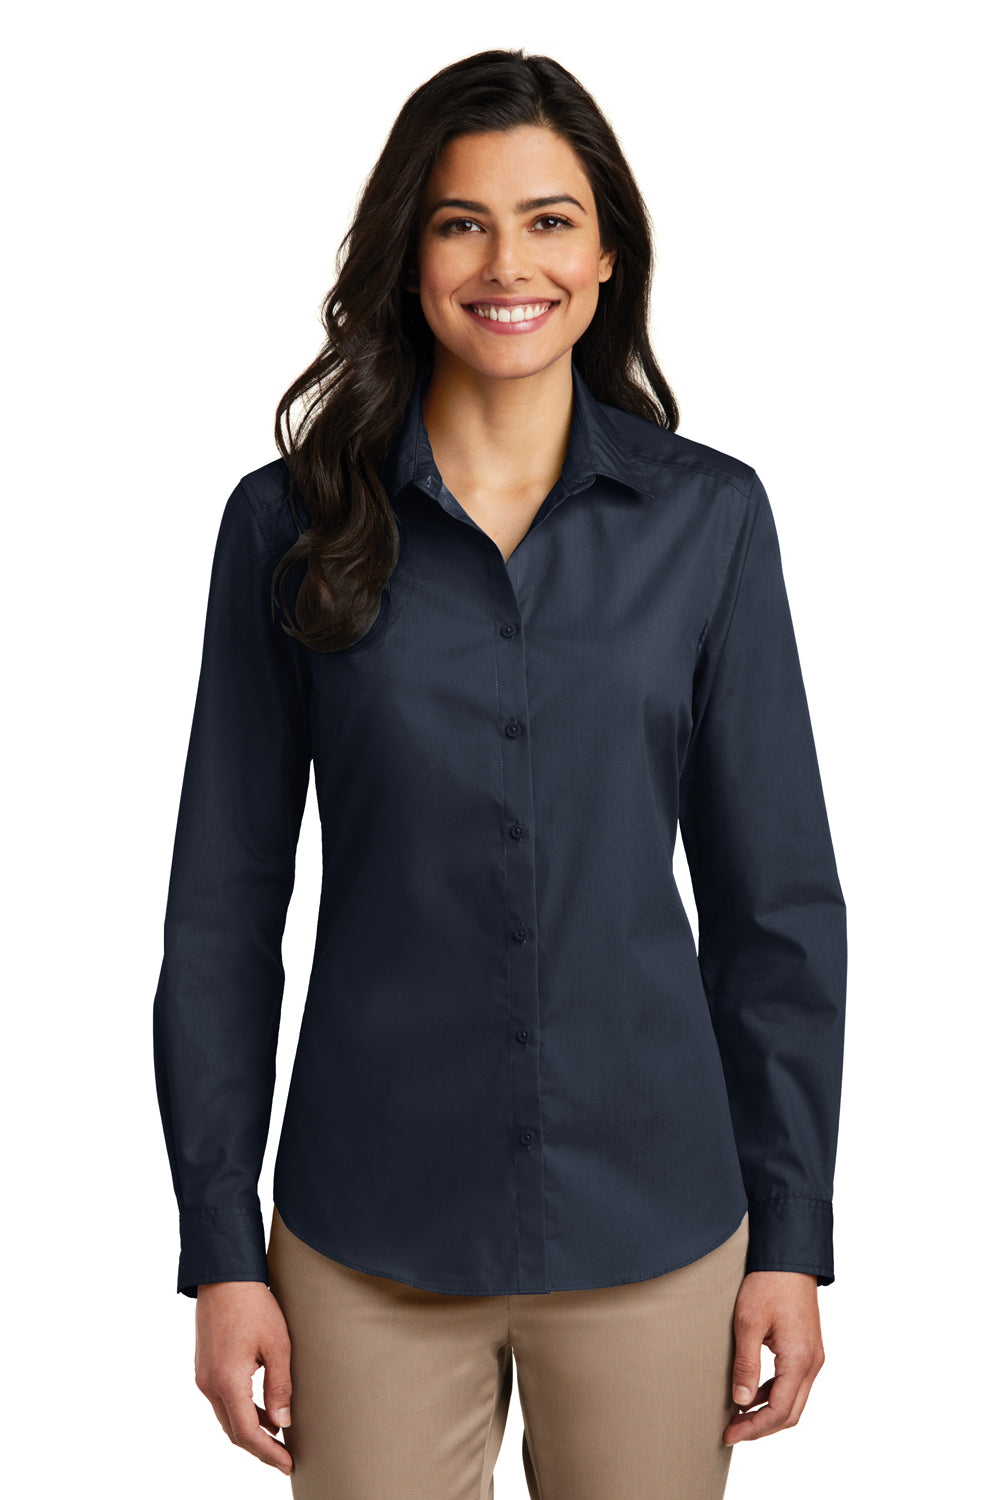 Port Authority LW100 Womens Carefree Stain Resistant Long Sleeve Button Down Shirt River Navy Blue Front